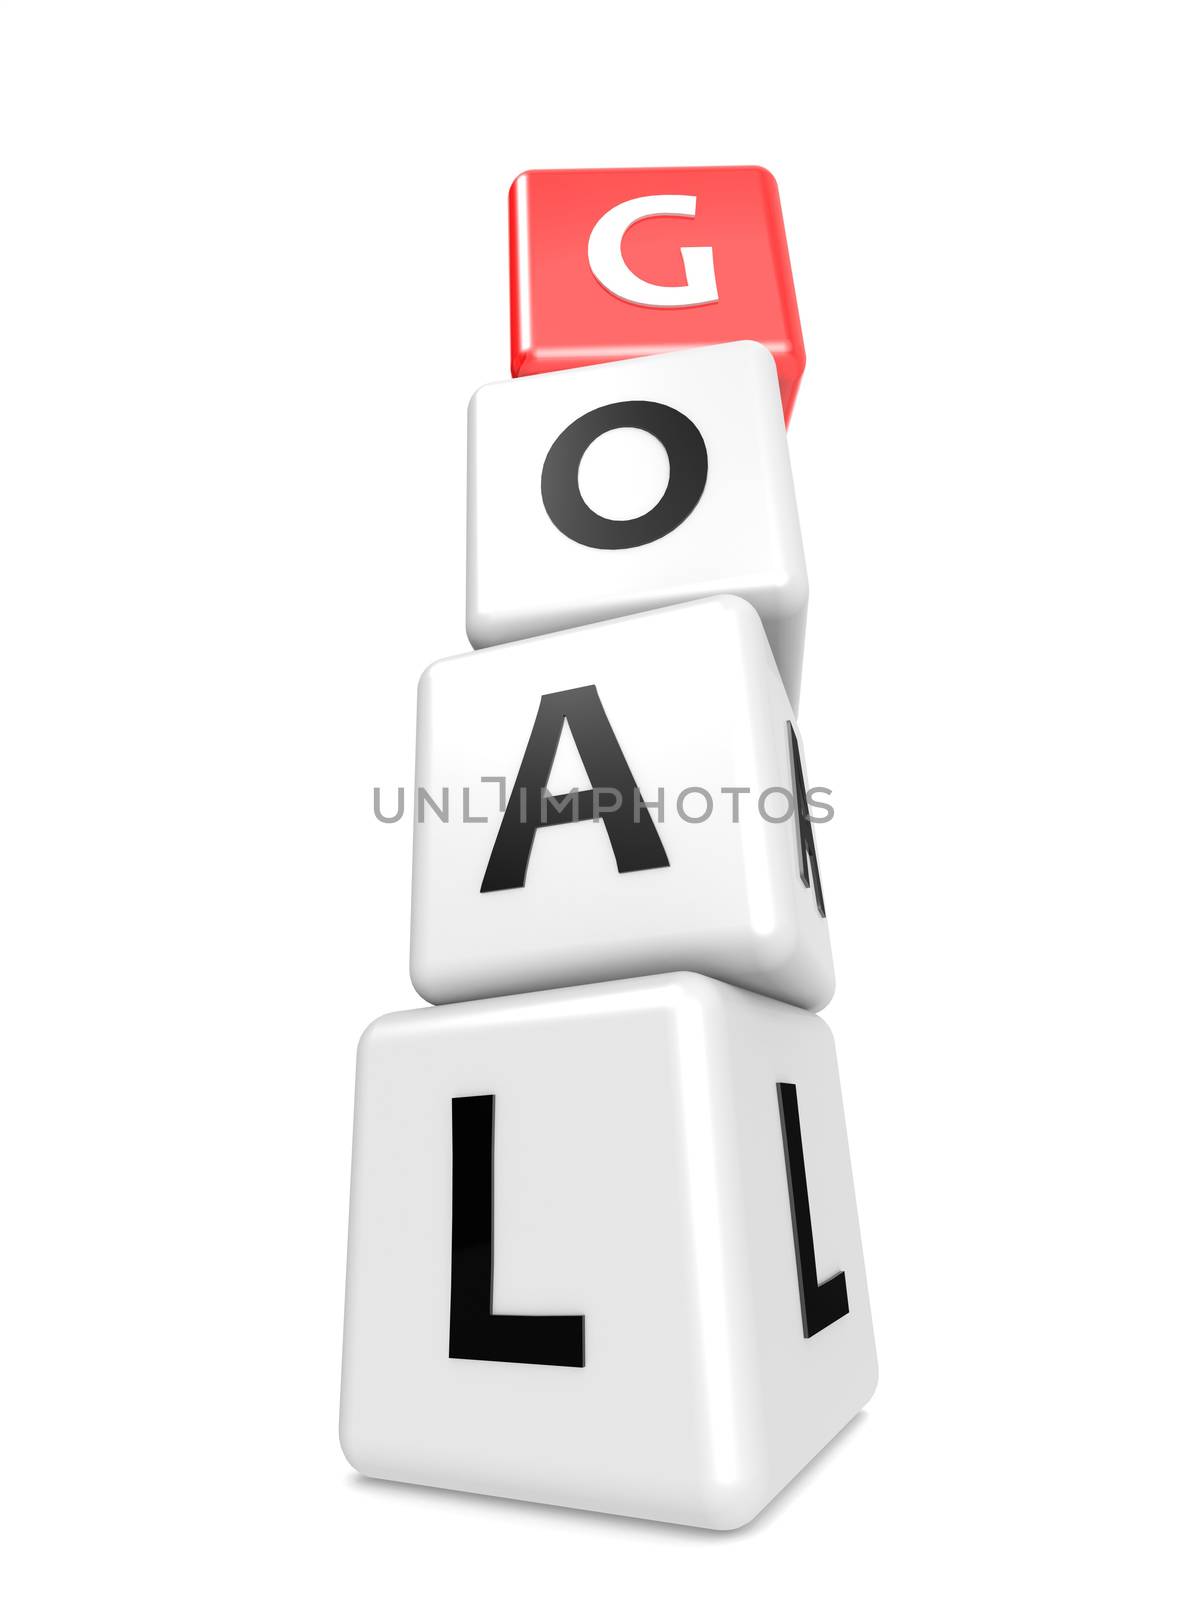 Buzzword goal image with hi-res rendered artwork that could be used for any graphic design.